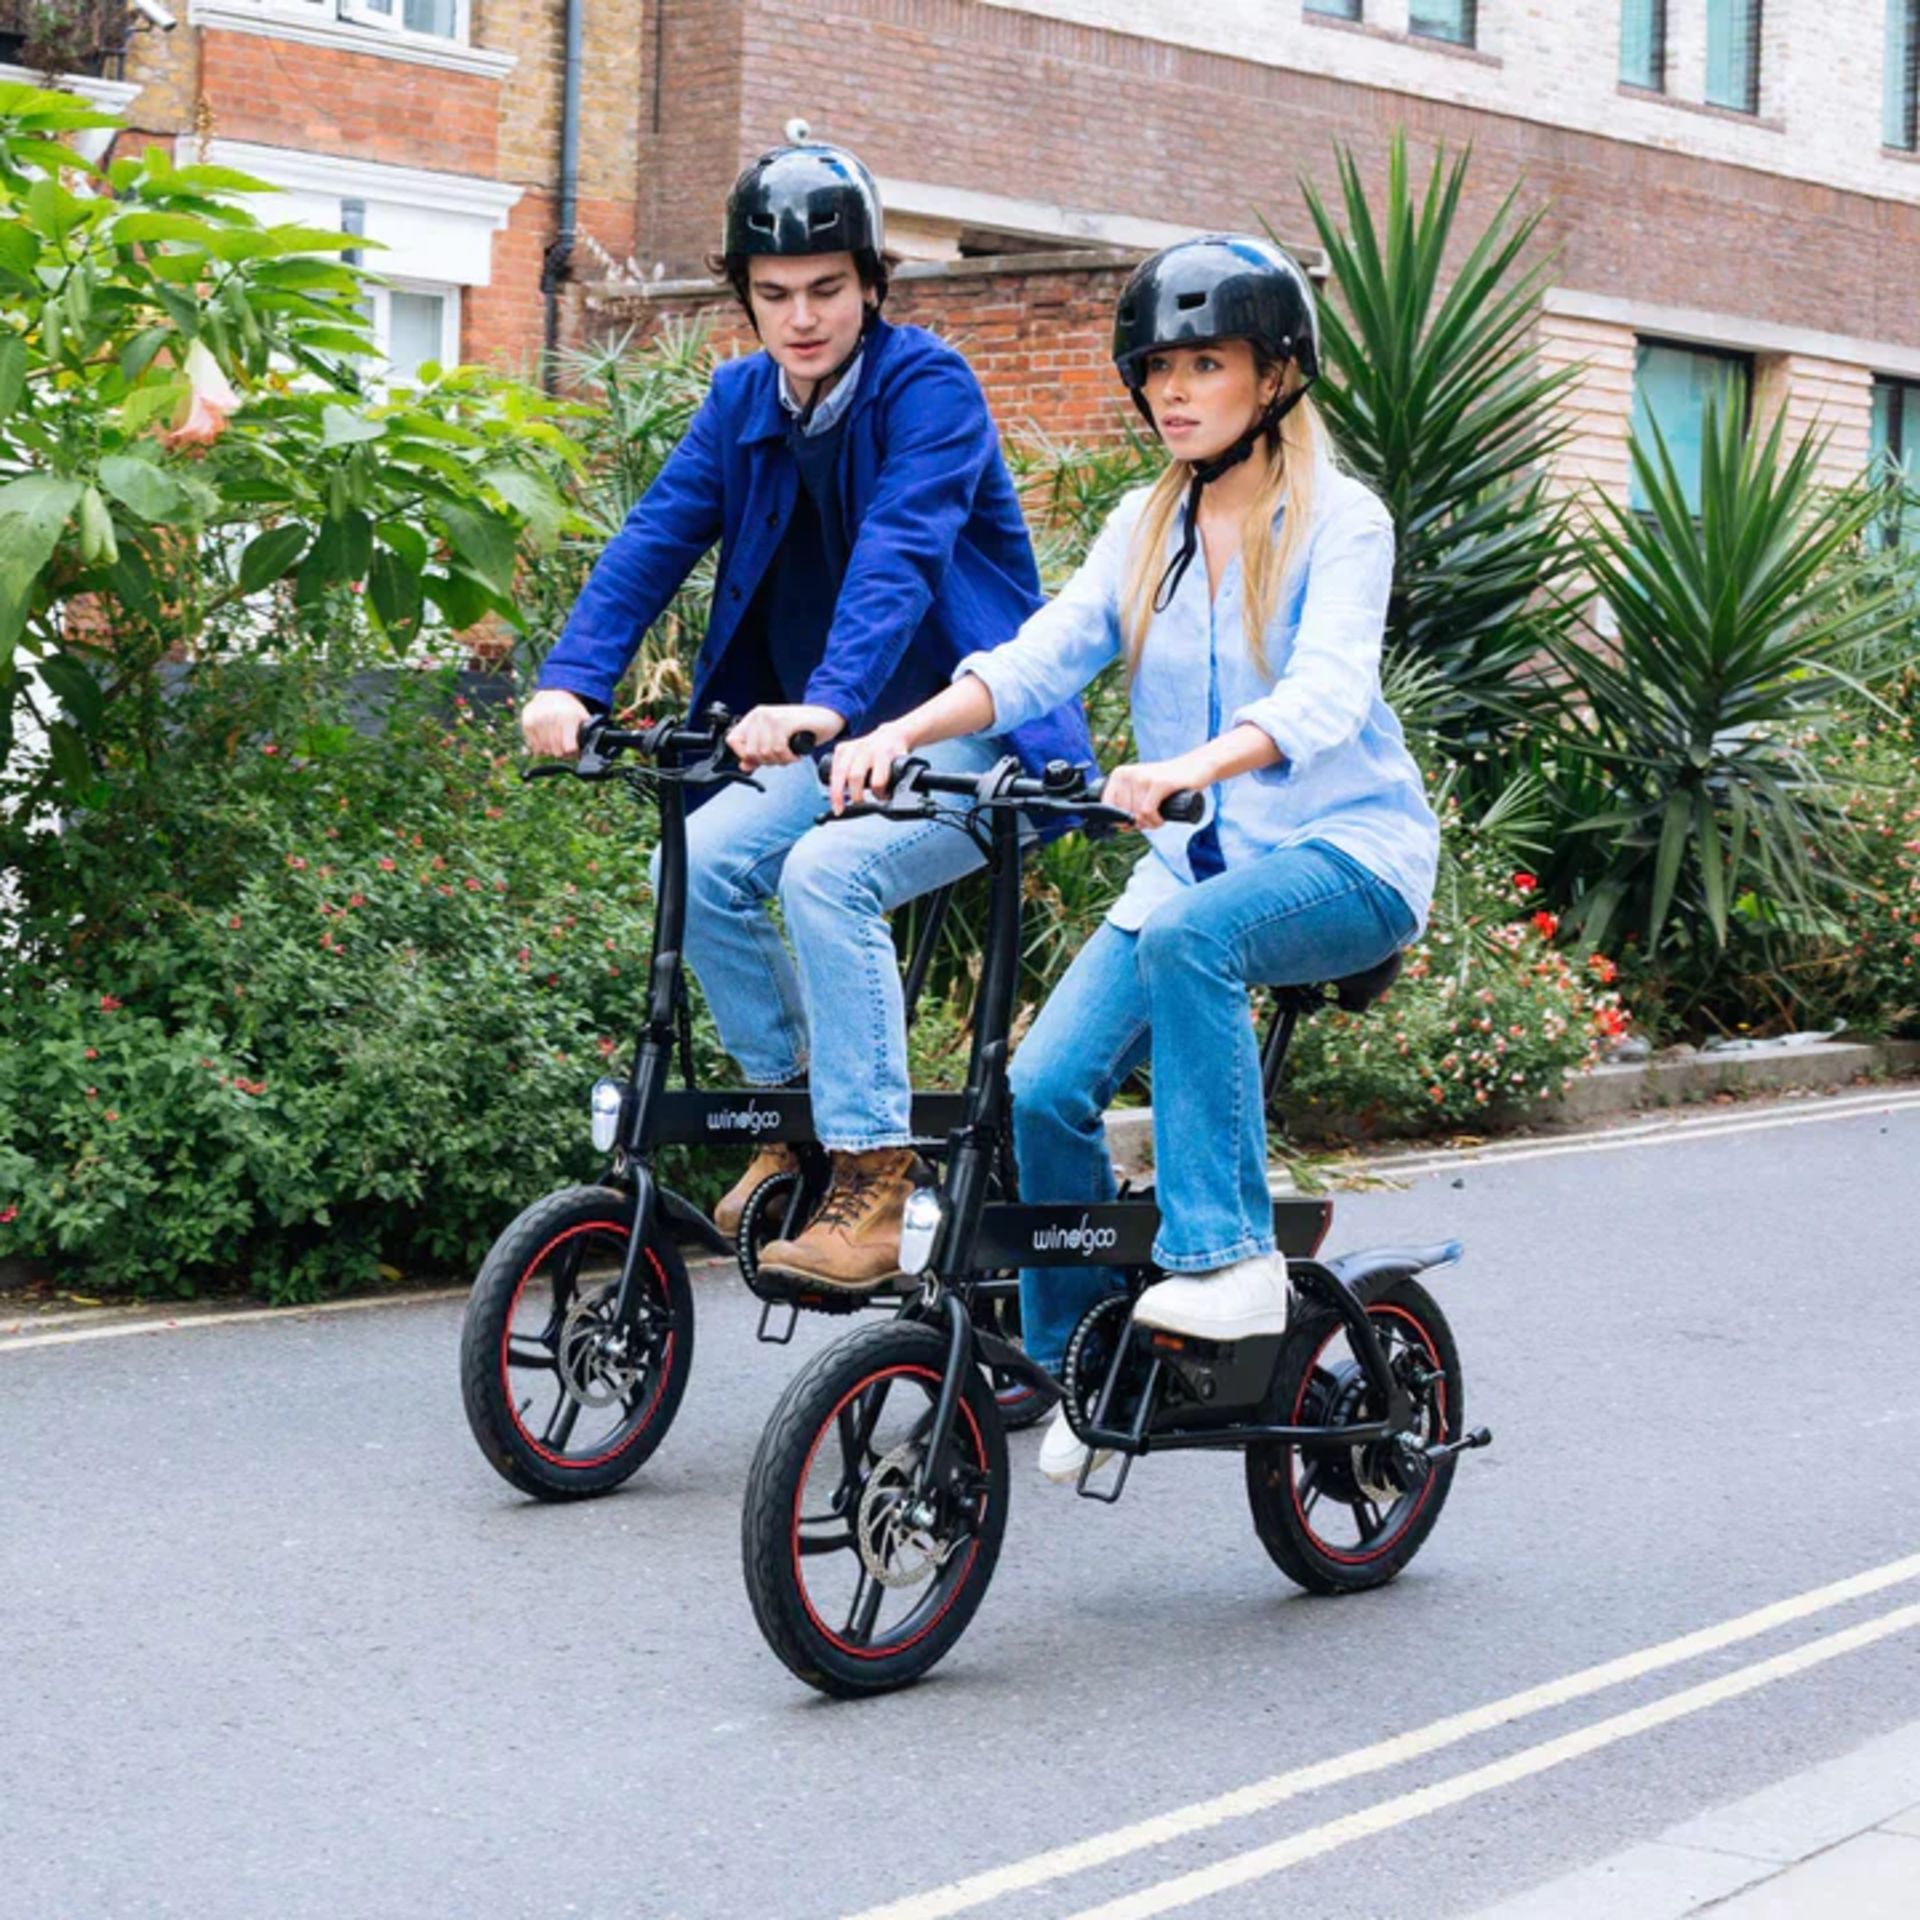 Windgoo B20 Pro Electric Bike. RRP £1,100.99. With 16-inch-wide tires and a frame of upgraded - Image 4 of 6